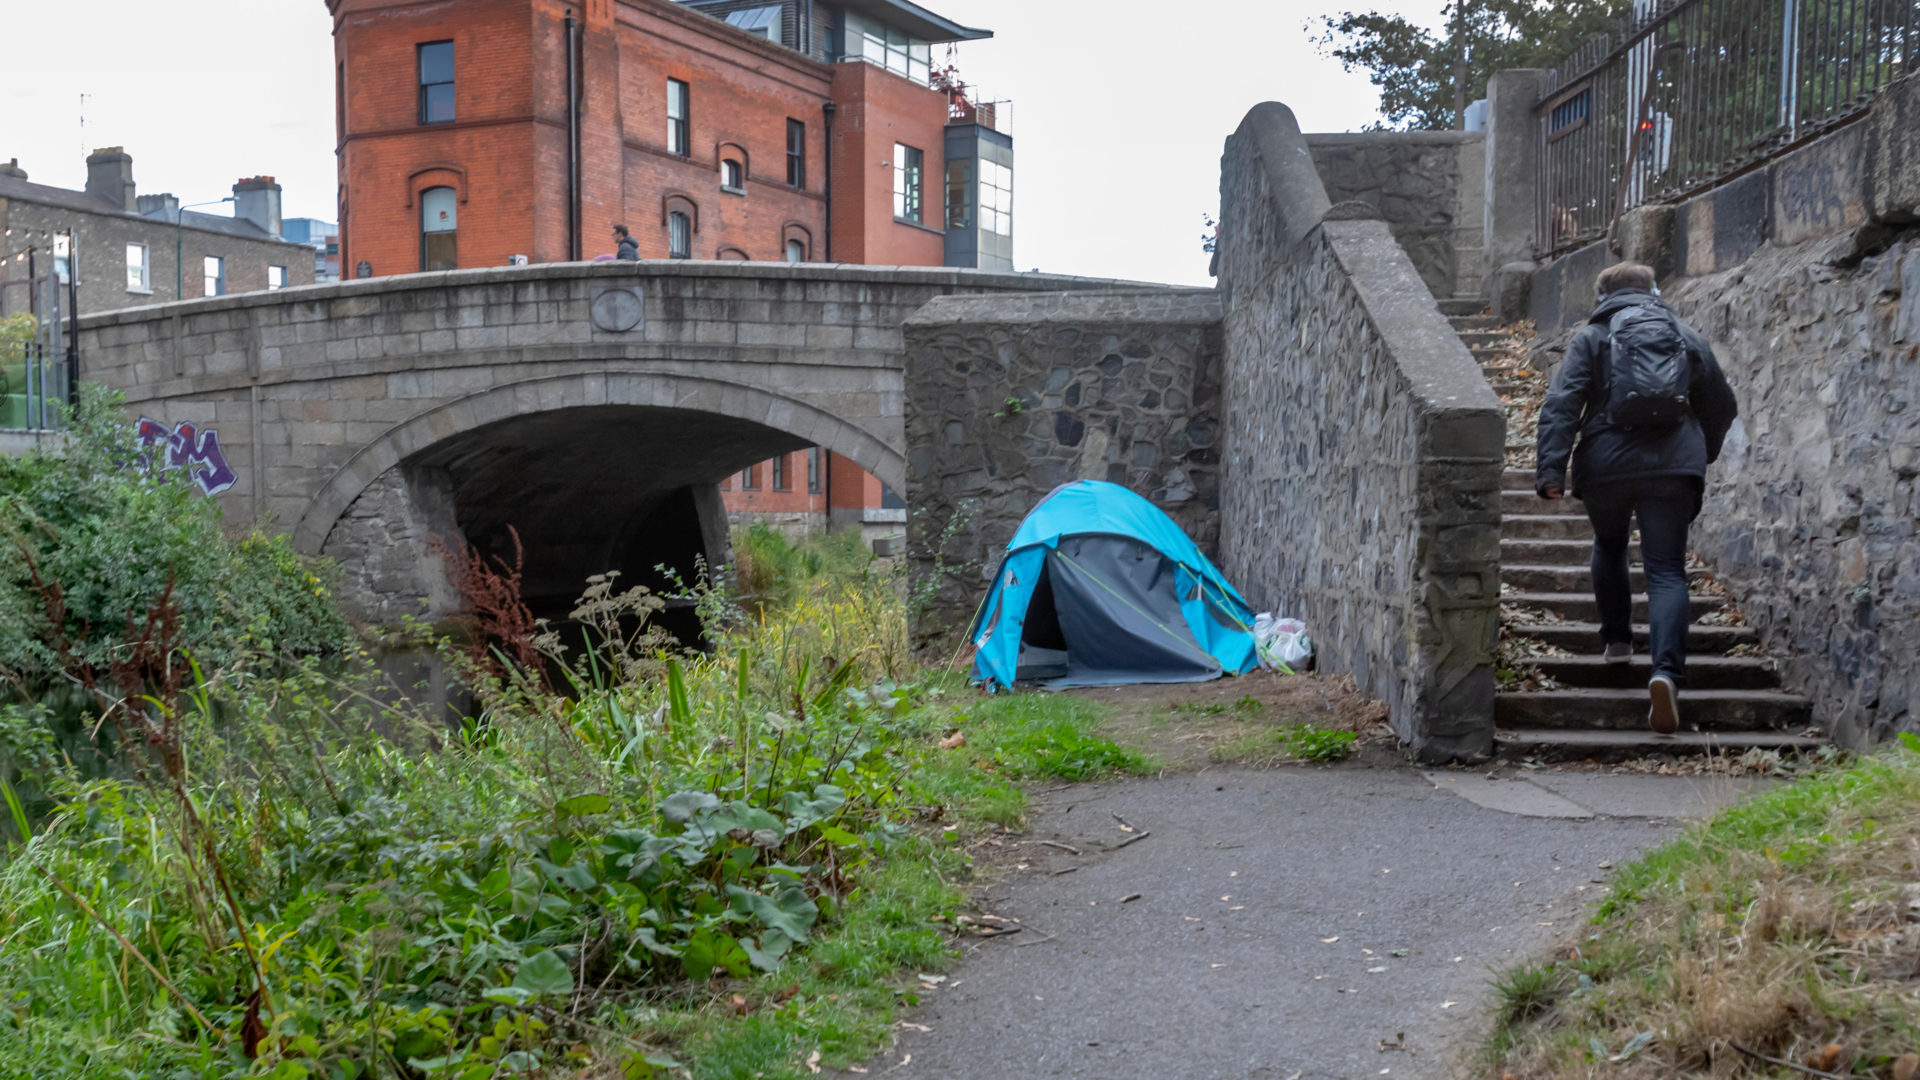 RBJ9KR A tent for someone homeless and a man walking by the Grand Canal waterway in Dublin, Ireland.